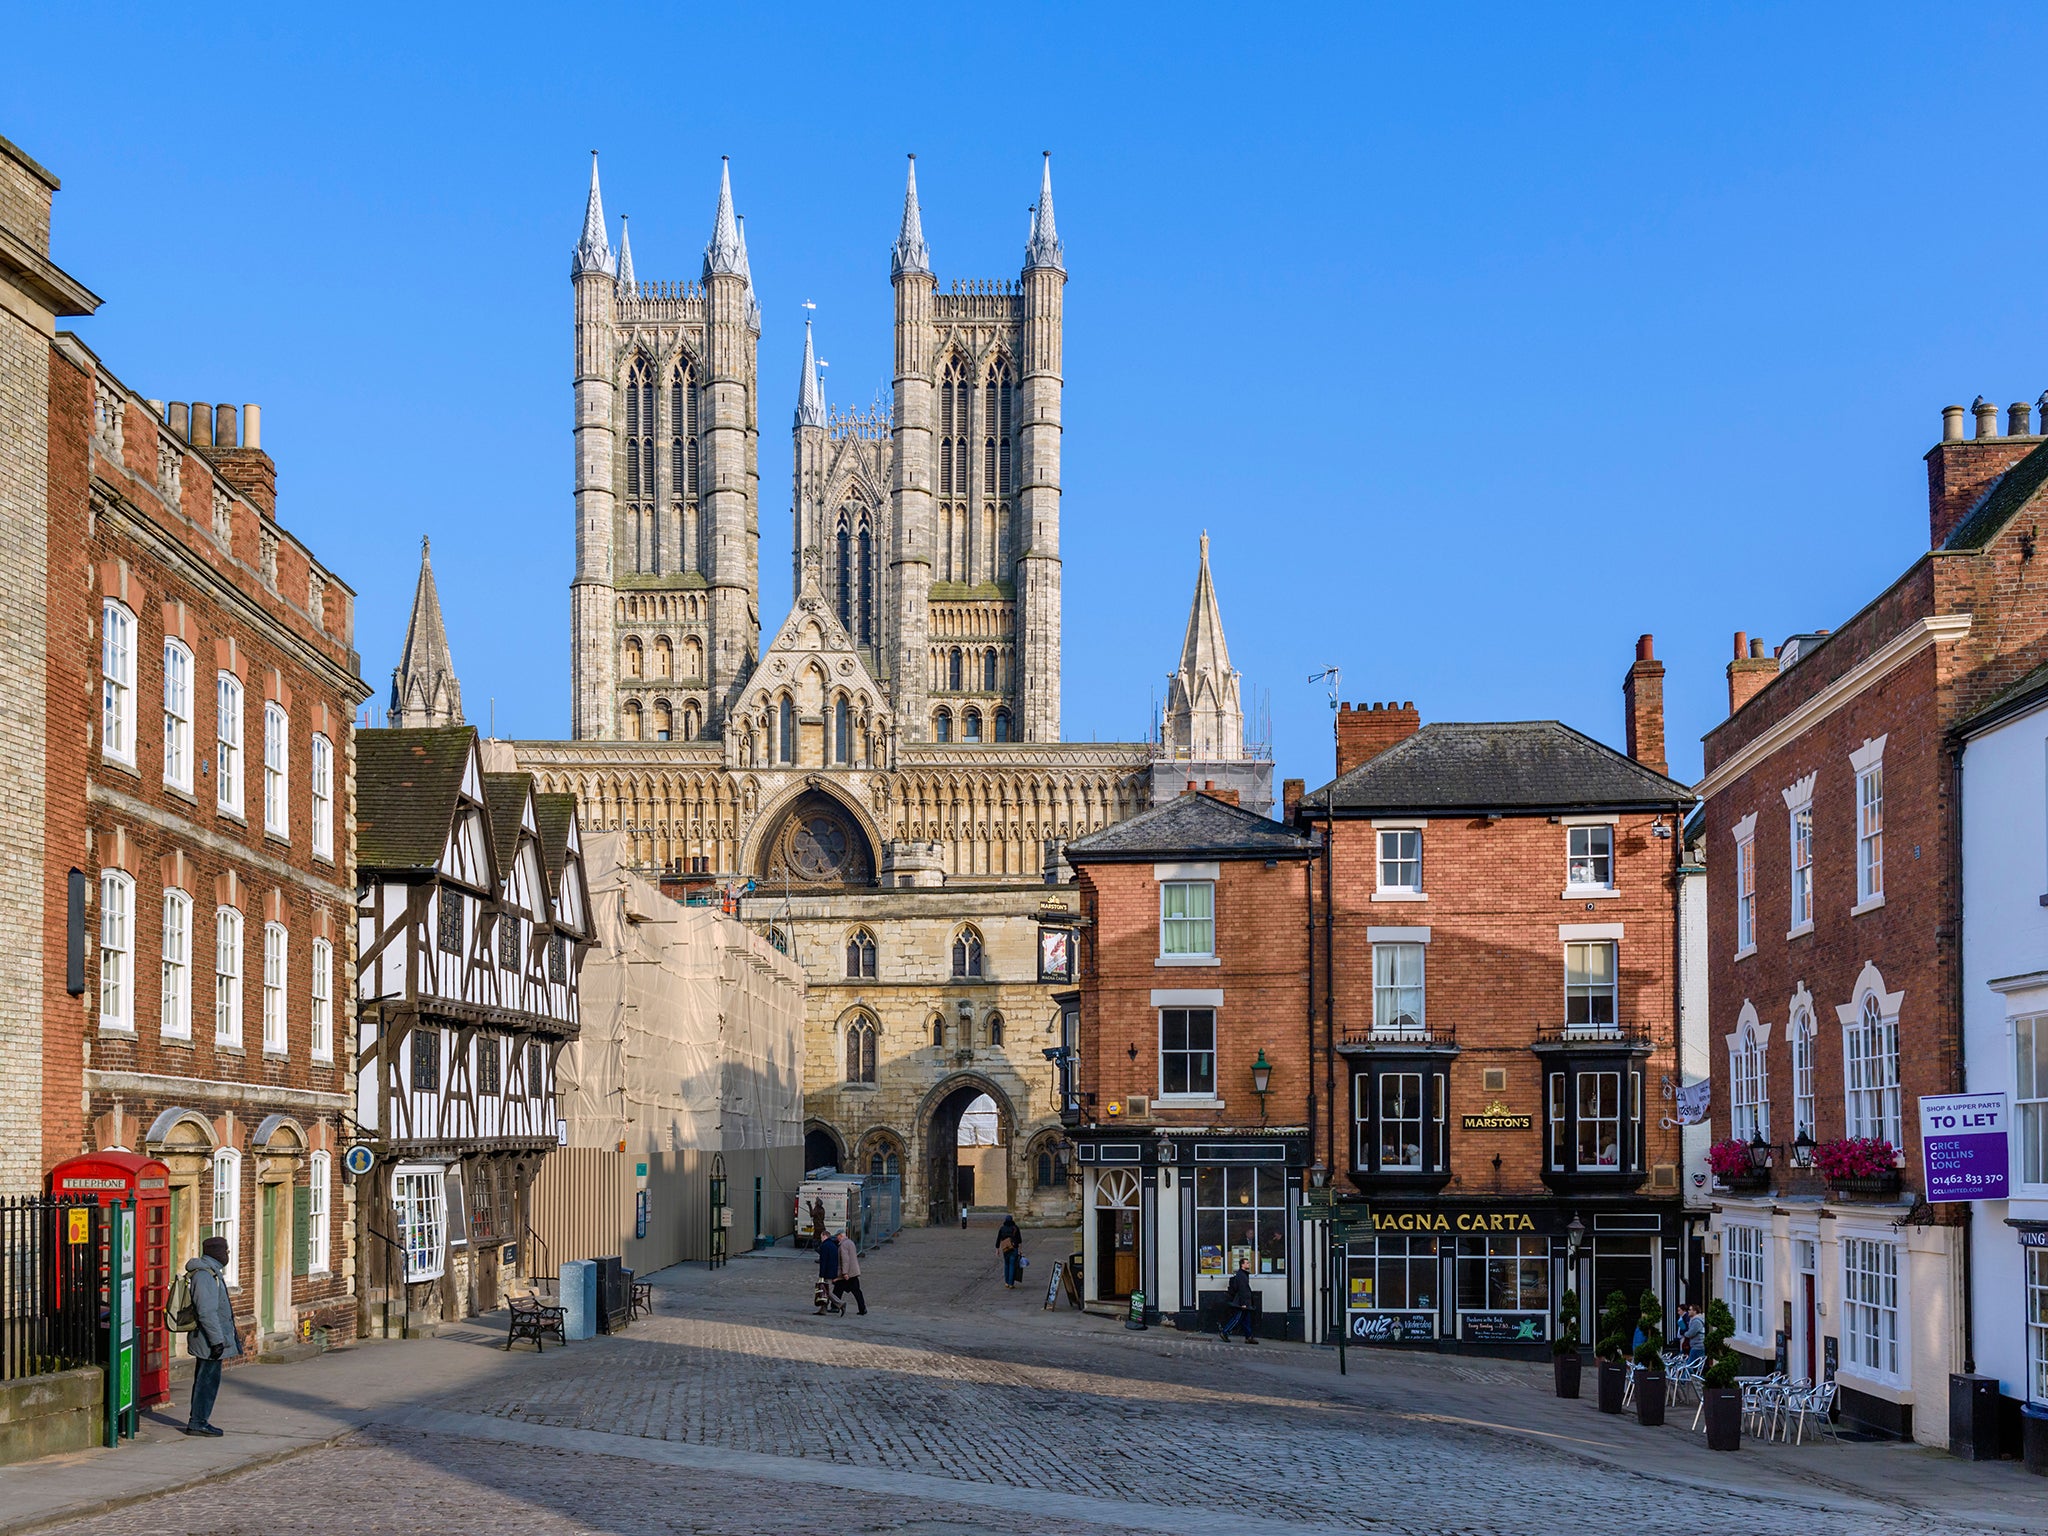 View of the Cathedral from Castle Hill, Lincoln, Lincolnshire (Ian Dagnall / Alamy)